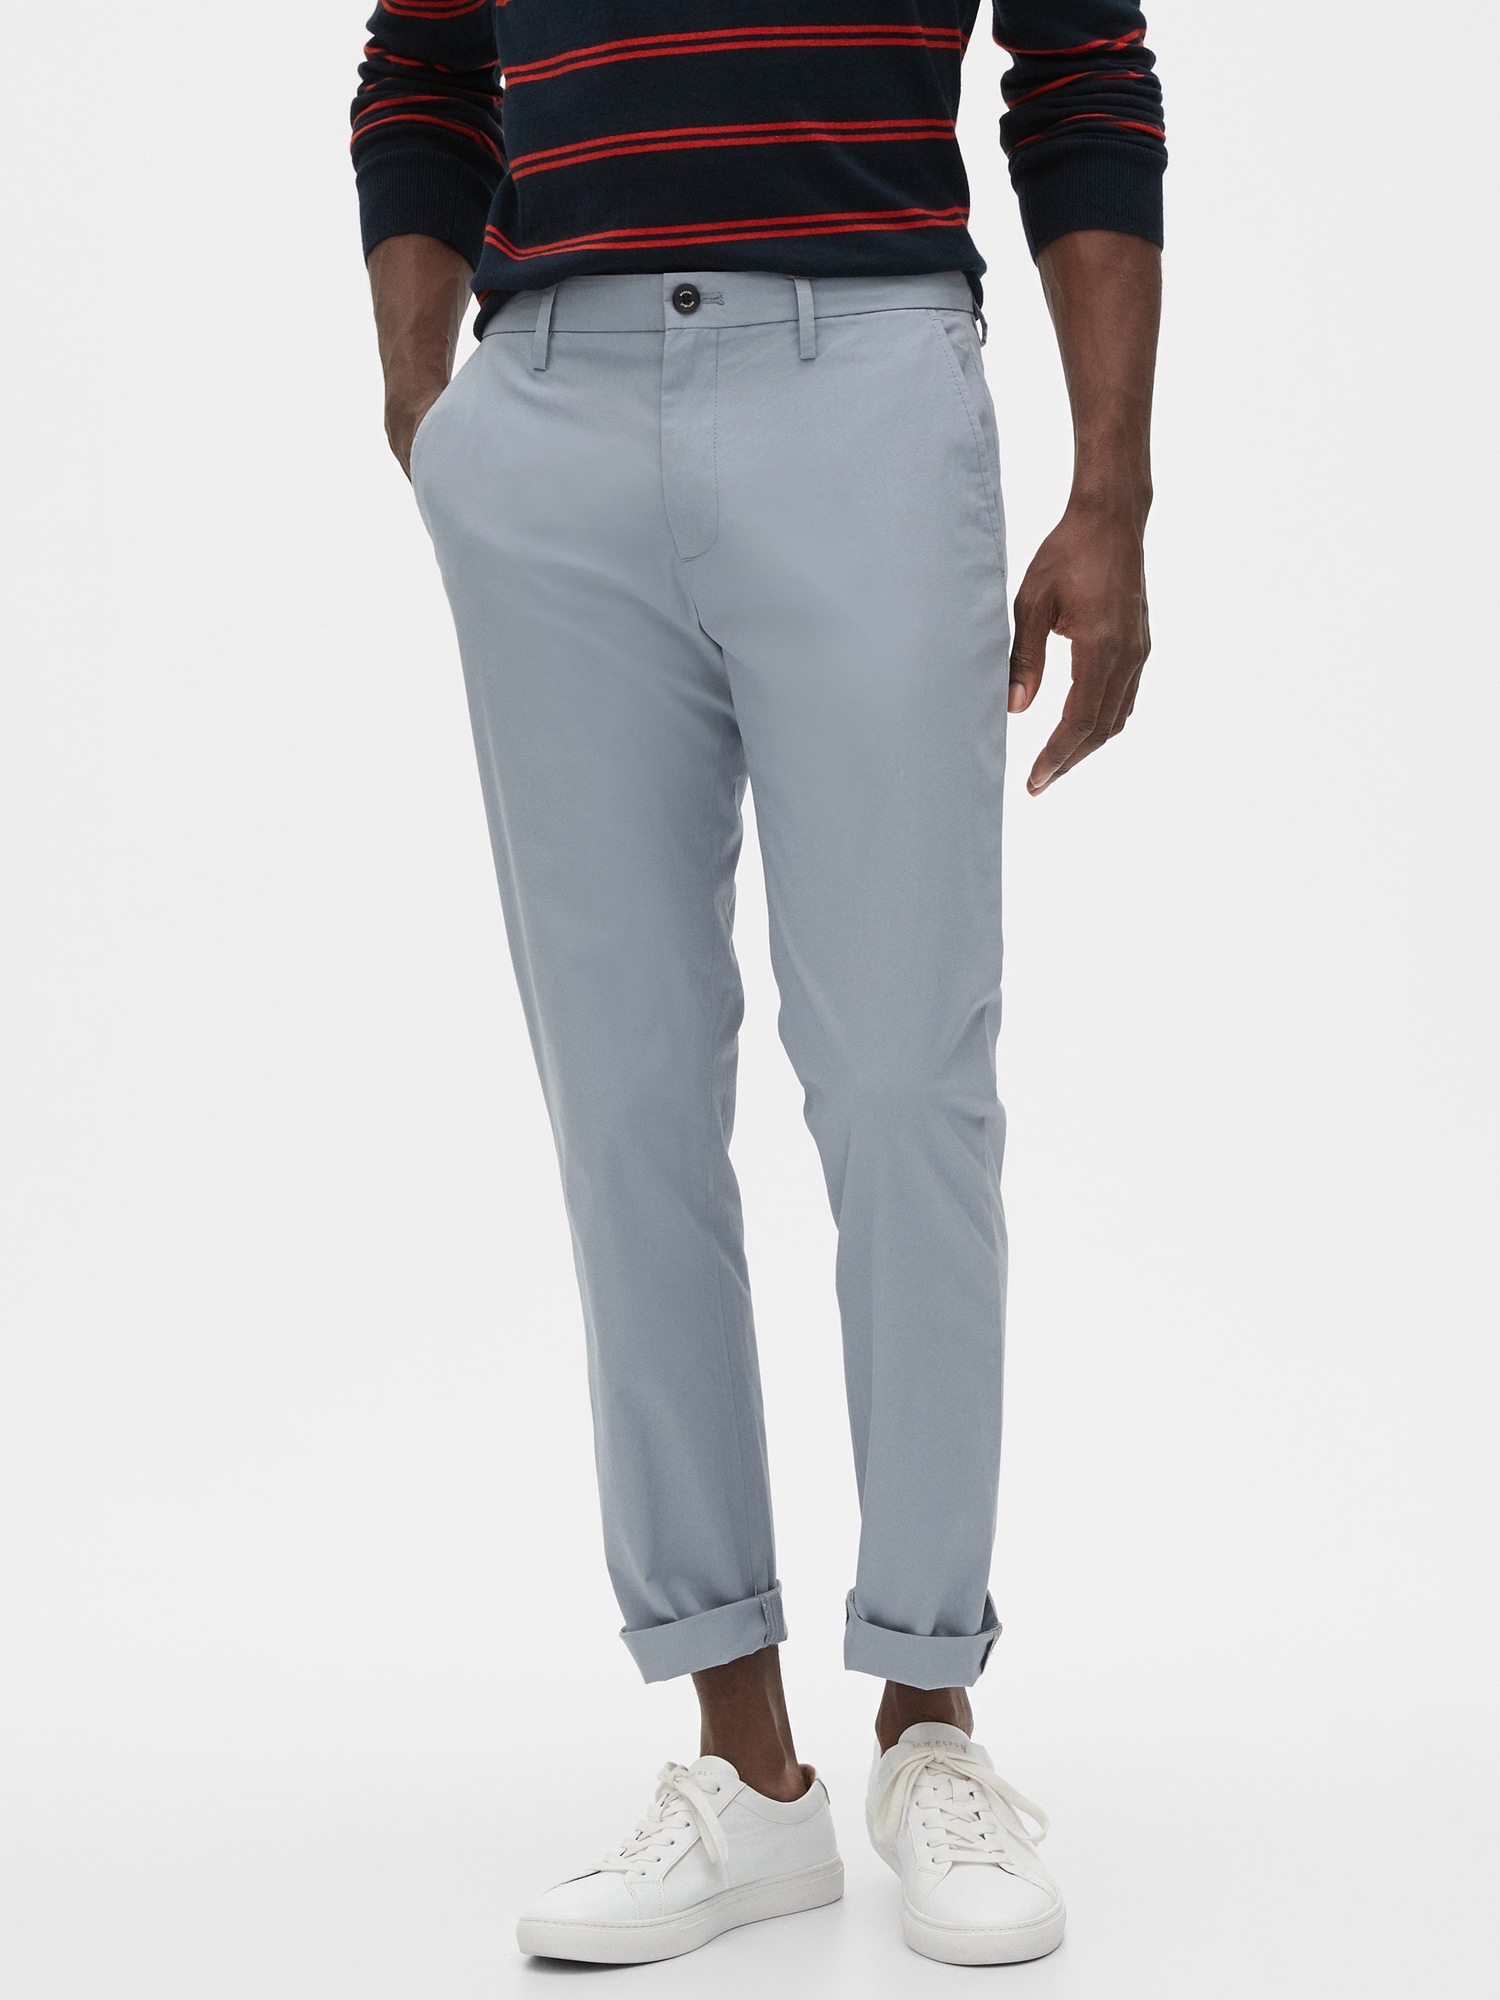 Aiden Slim-Fit Stretch Summer-Weight Chino | Banana Republic Factory